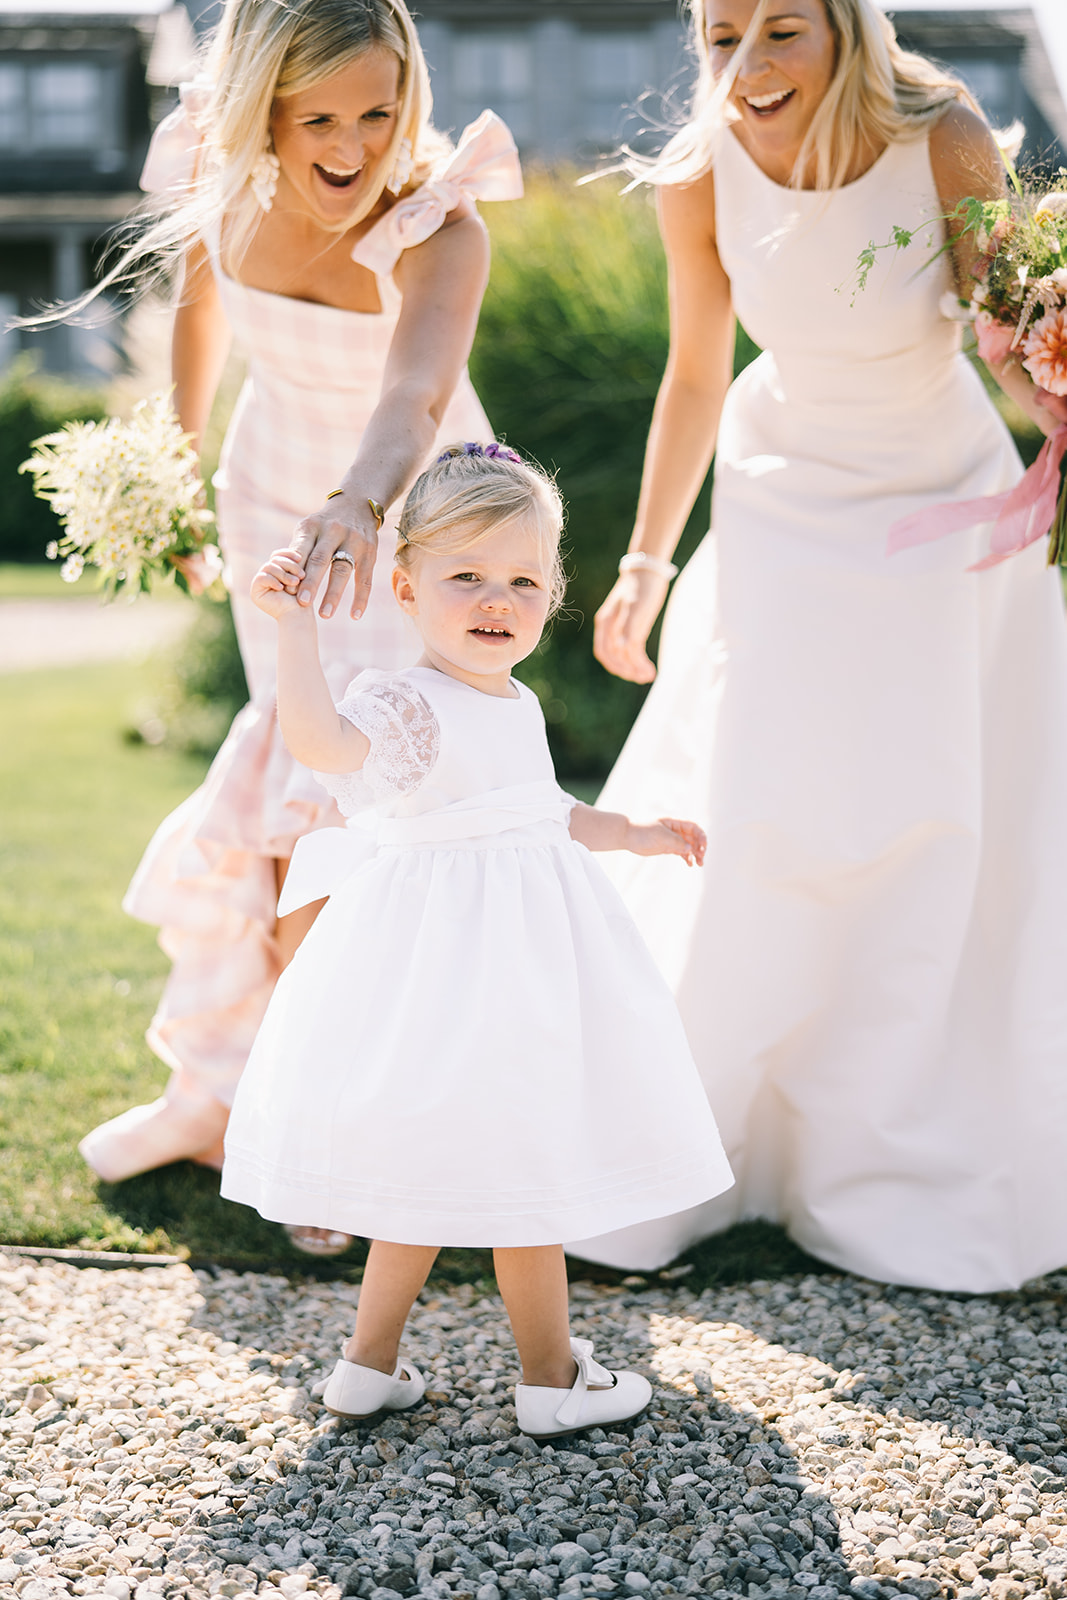 Woman in pink dress and woman in white dress leaning over and smiling at a small child in white 